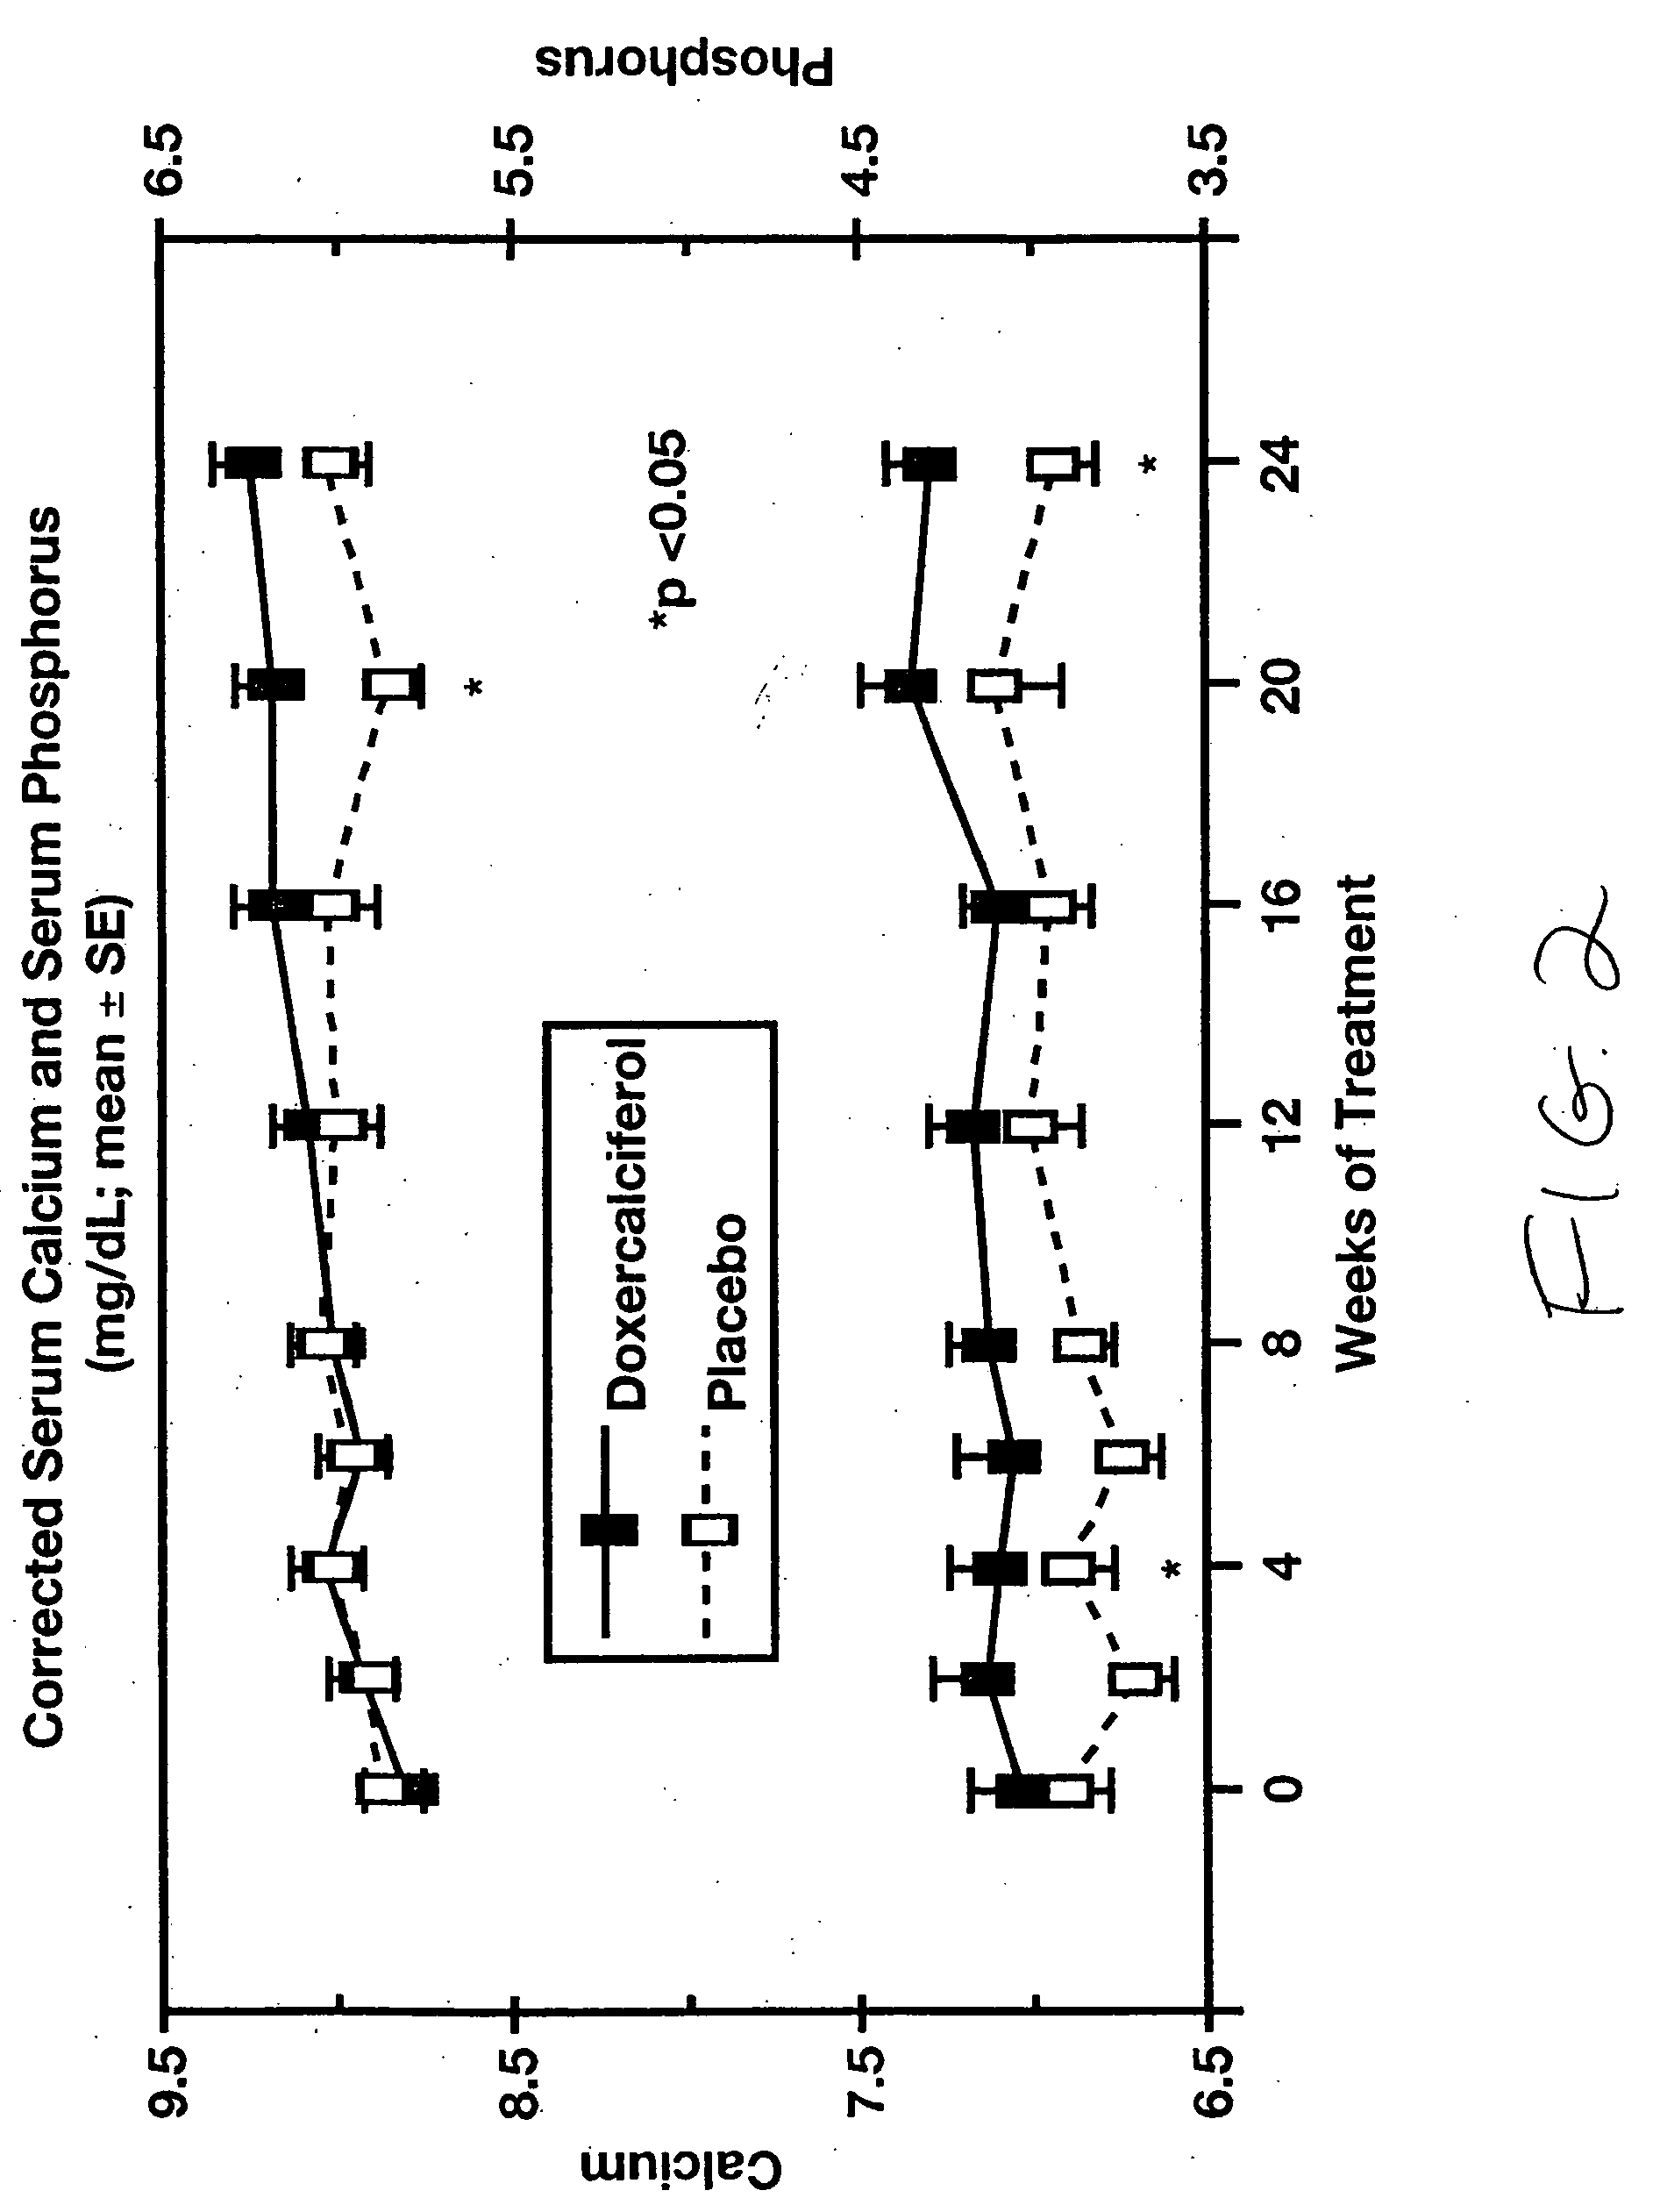 Methods of treating various vitamin D metabolism conditions with 1alpha-hydroxyvitamin D2